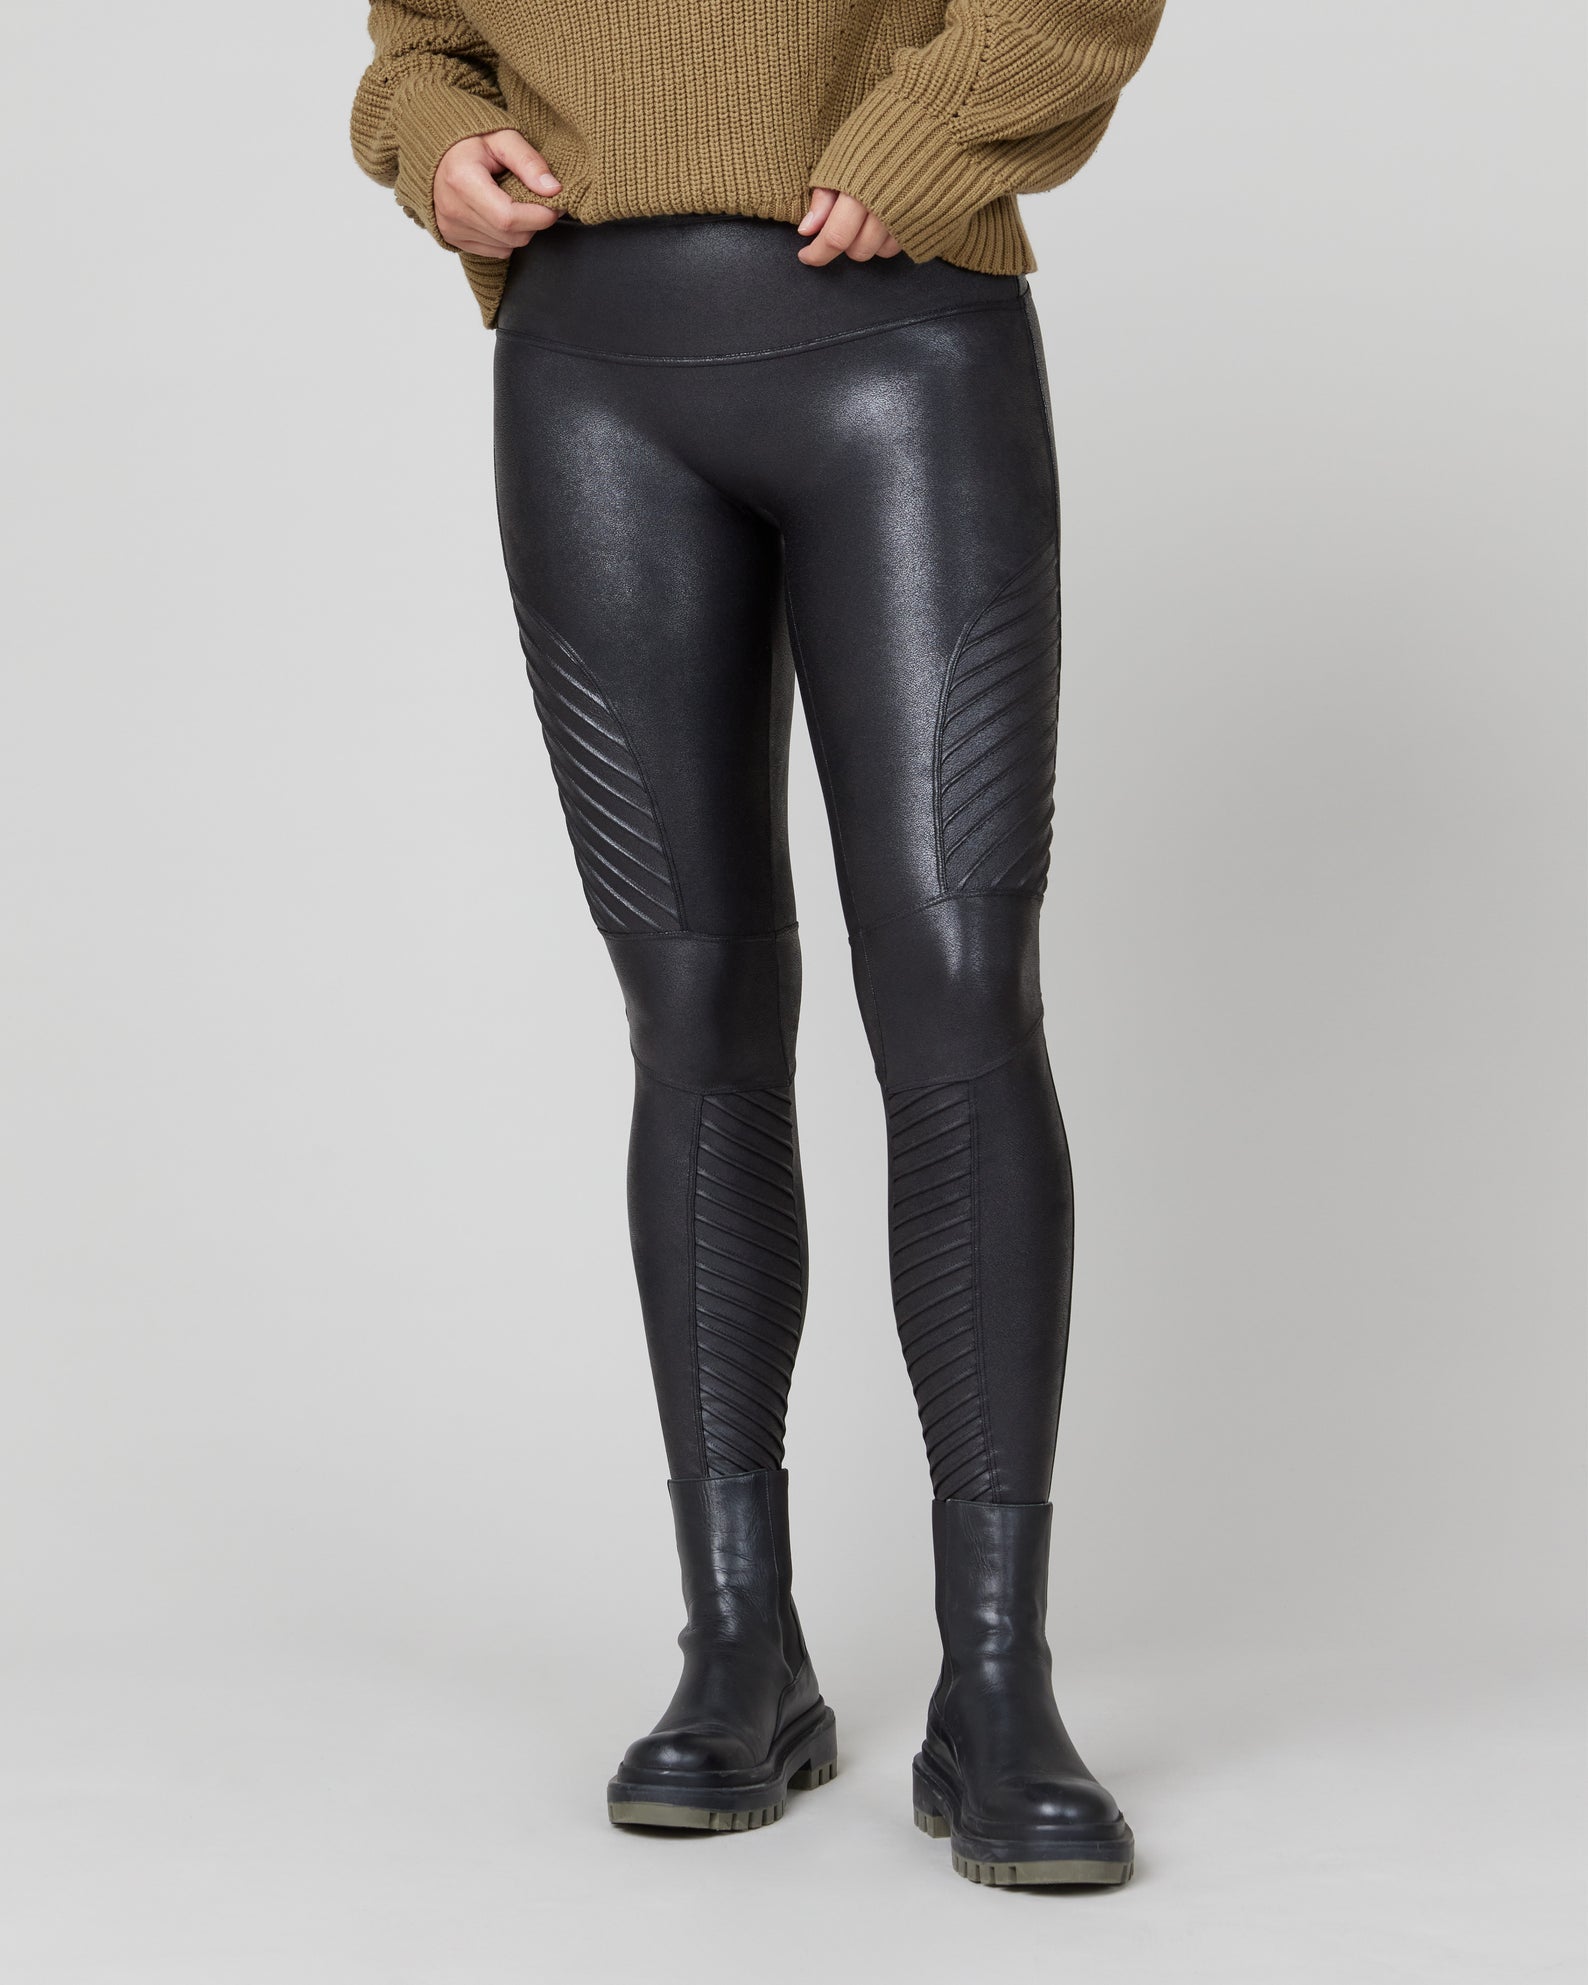 Brown Thomas - The hottest leggings in town, the SPANX Faux Leather Moto  Leggings are back!   /motorbike-leggings/30x5351x20136rveryblk.html